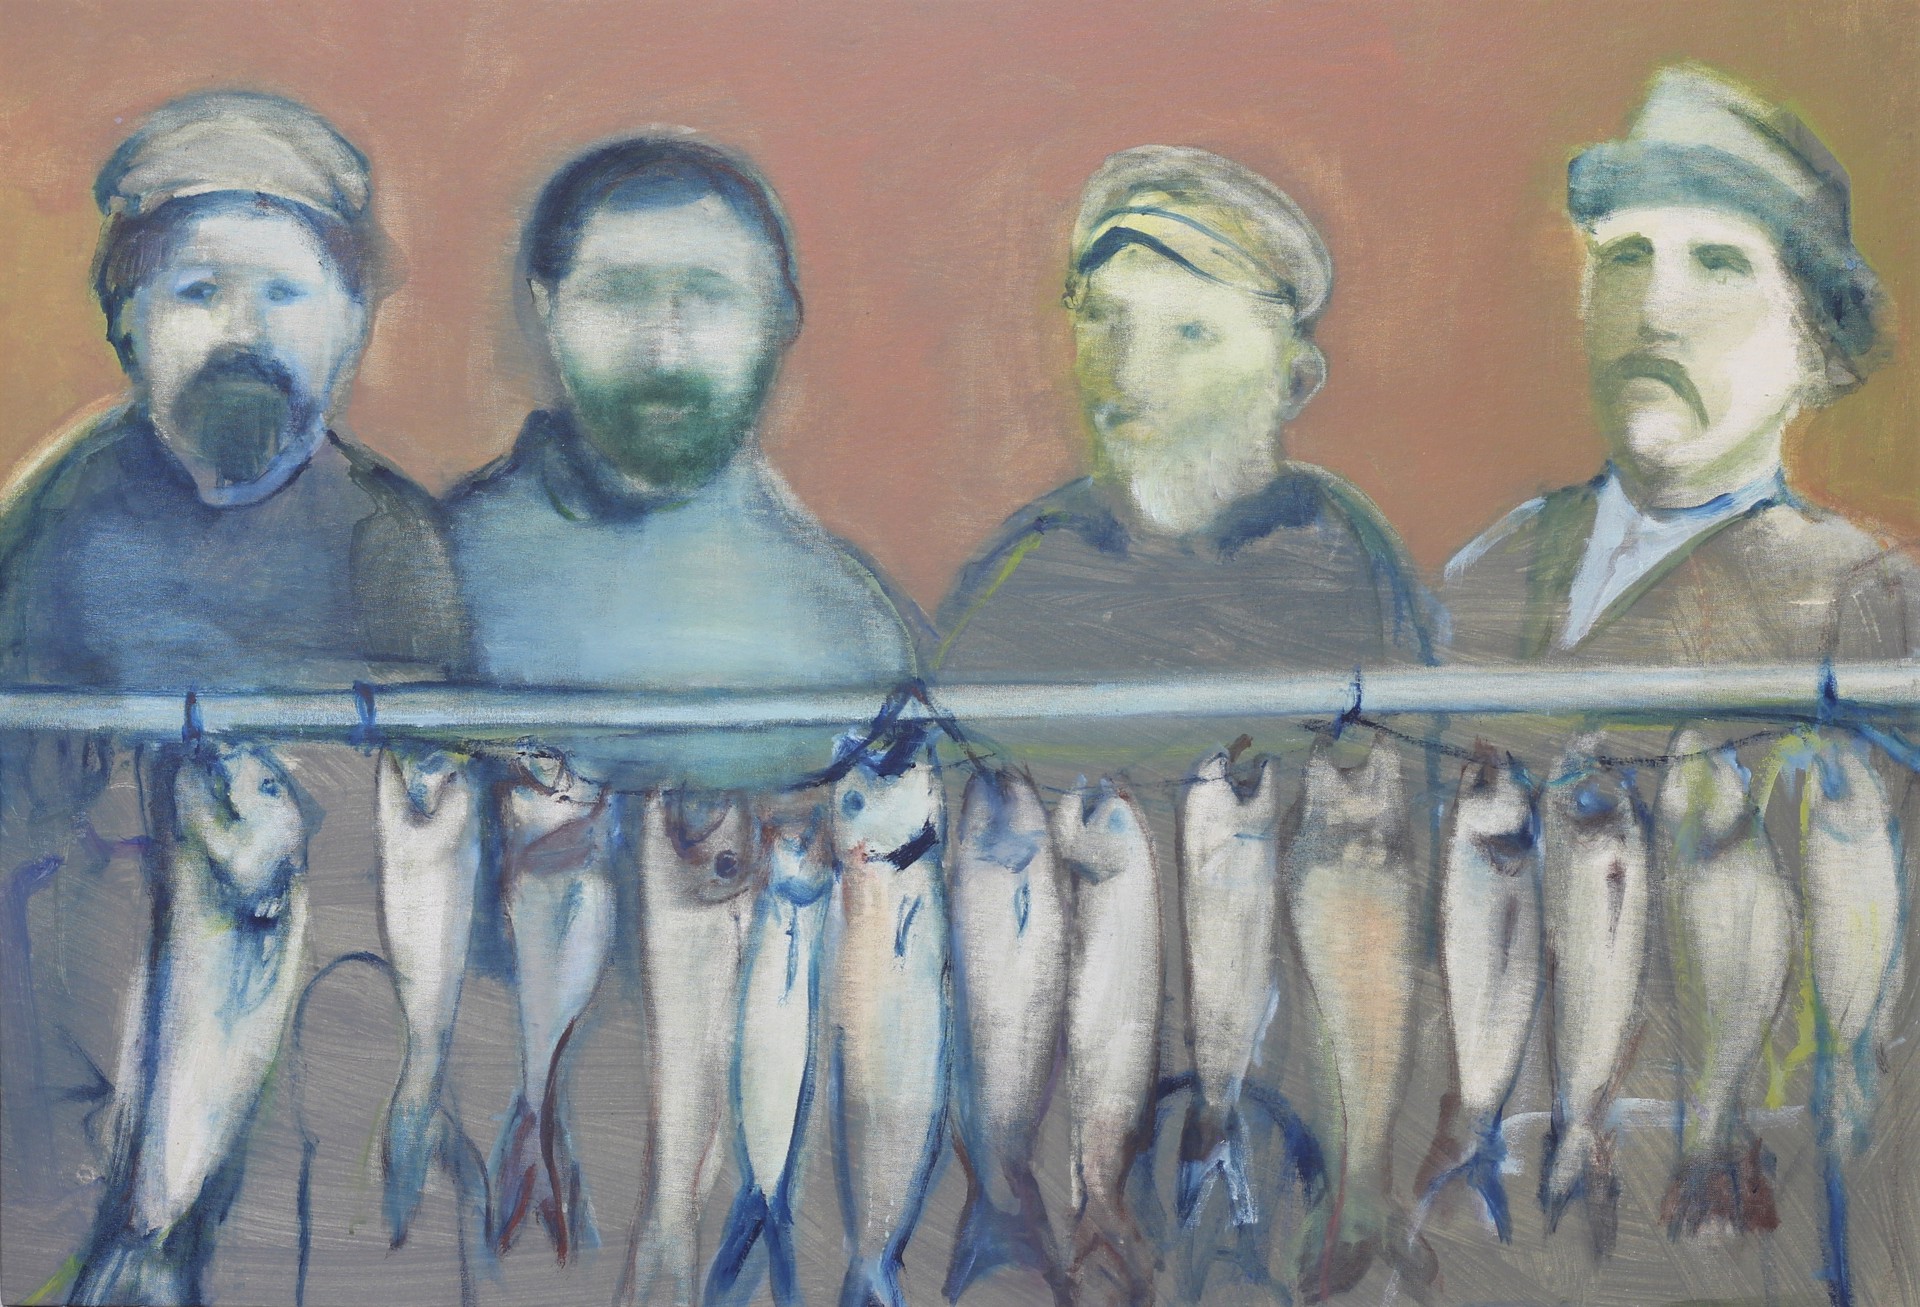 14 FISH AND NOBODY IS HUNGRY by CHRISTINA THWAITES (Figures)